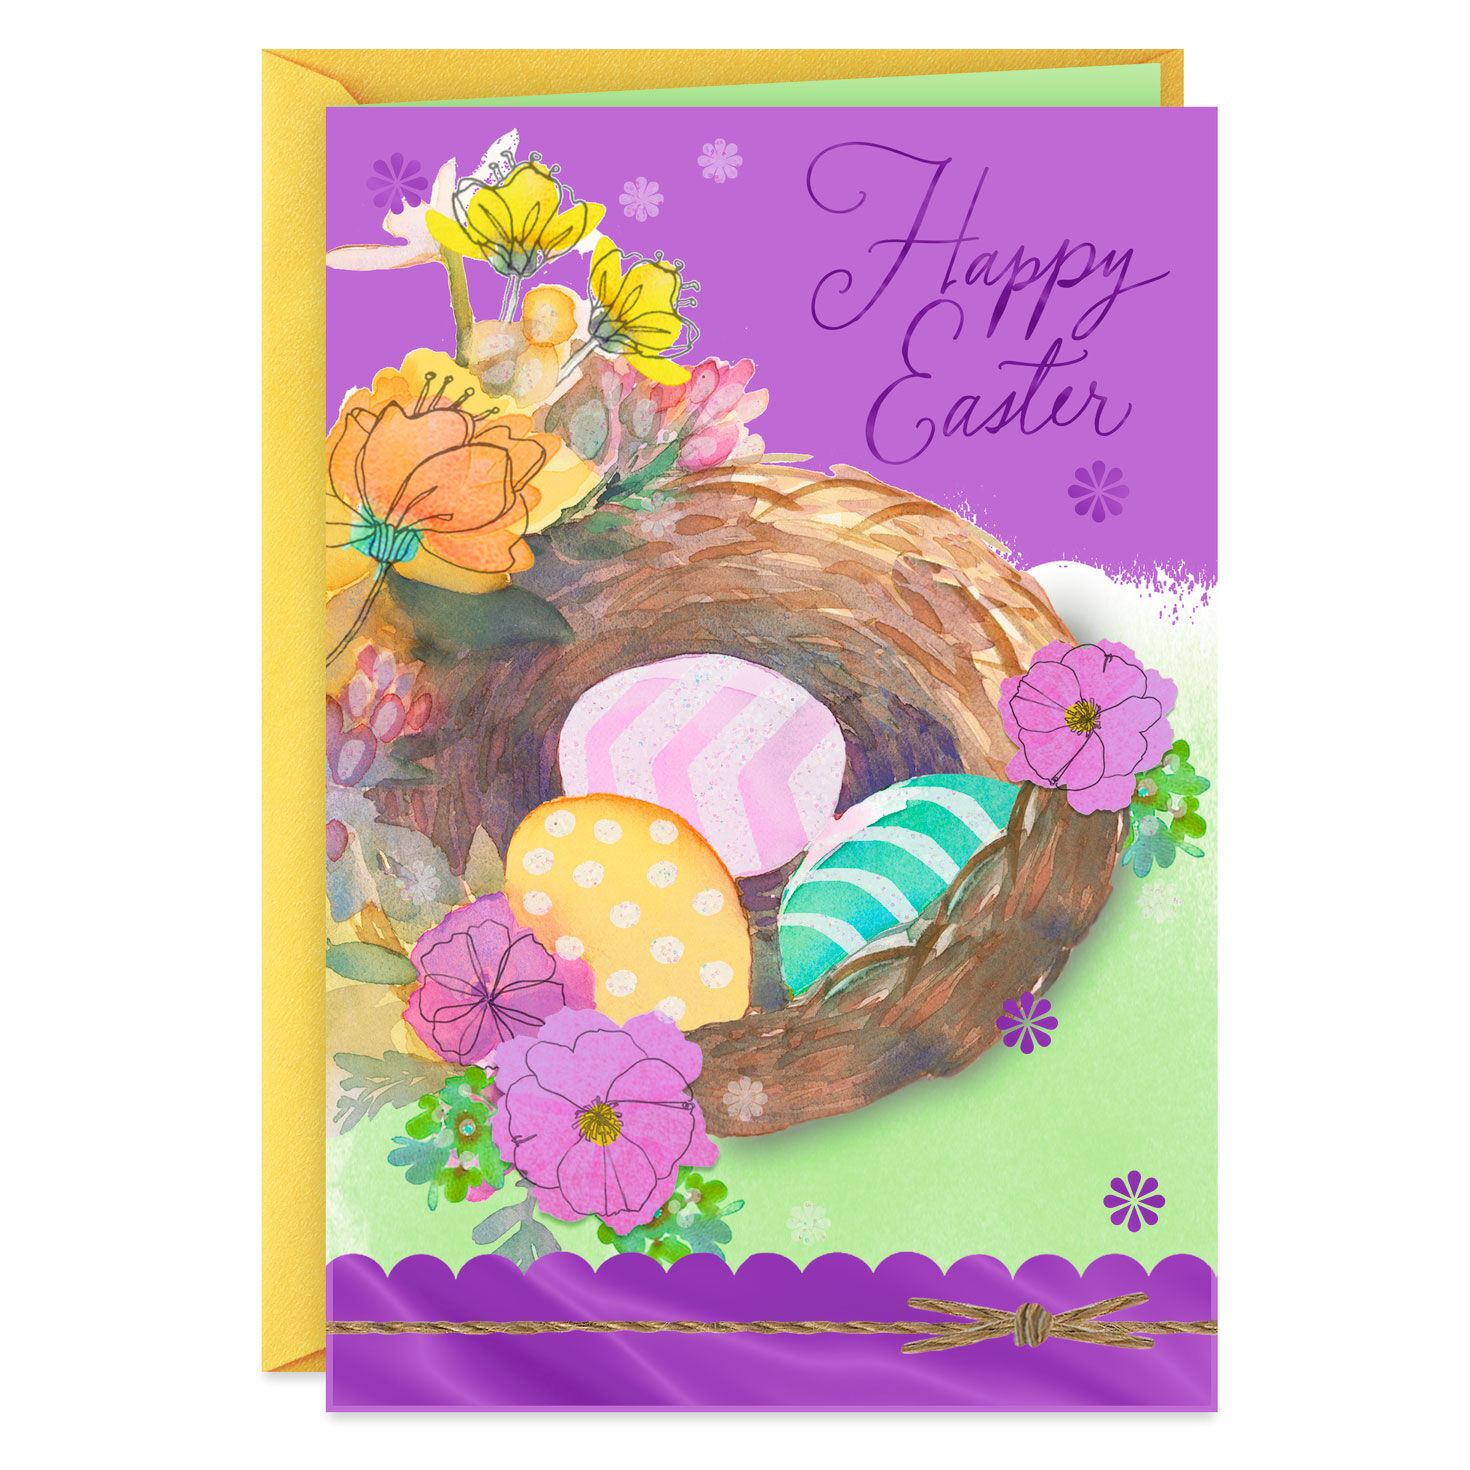 Hallmark Easter Greeting Card for Husband Warm and Loved Feelings at Easter